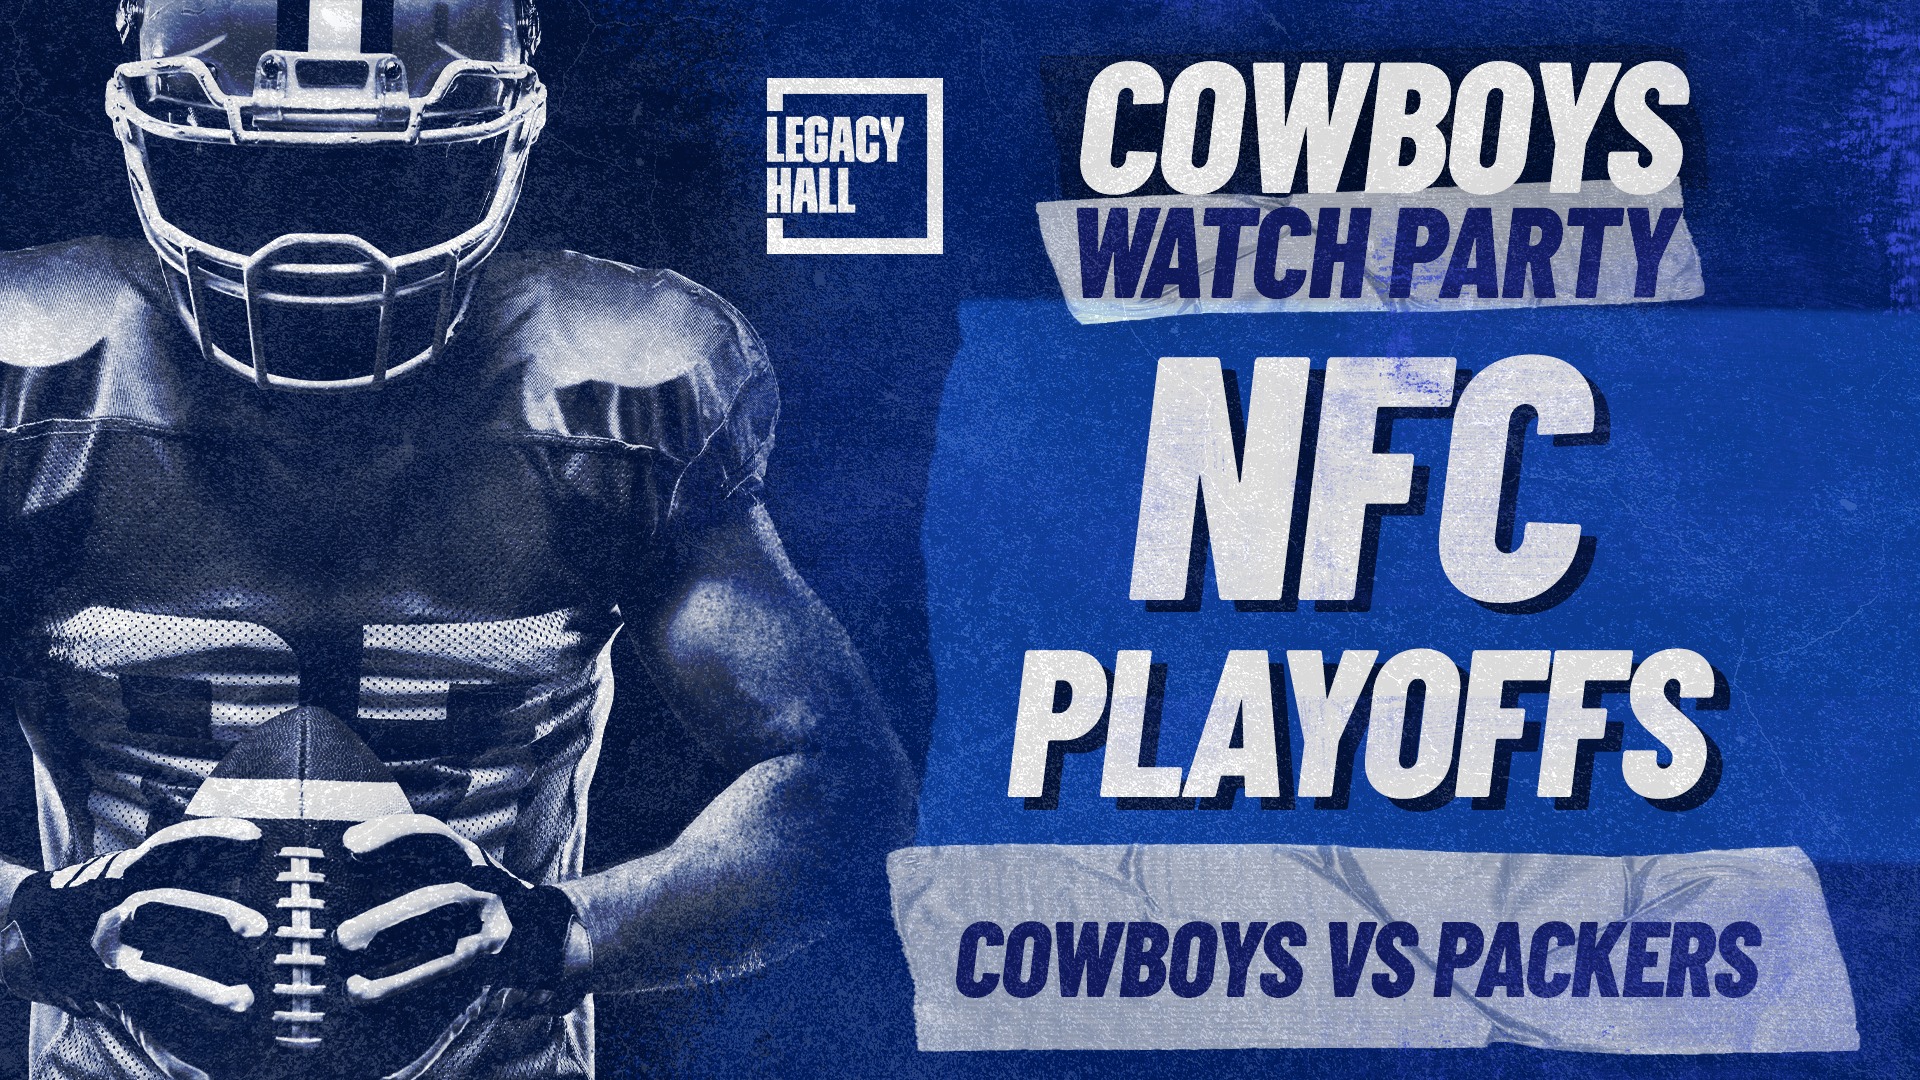 Cowboys-vs-Packers NFC Playoffs